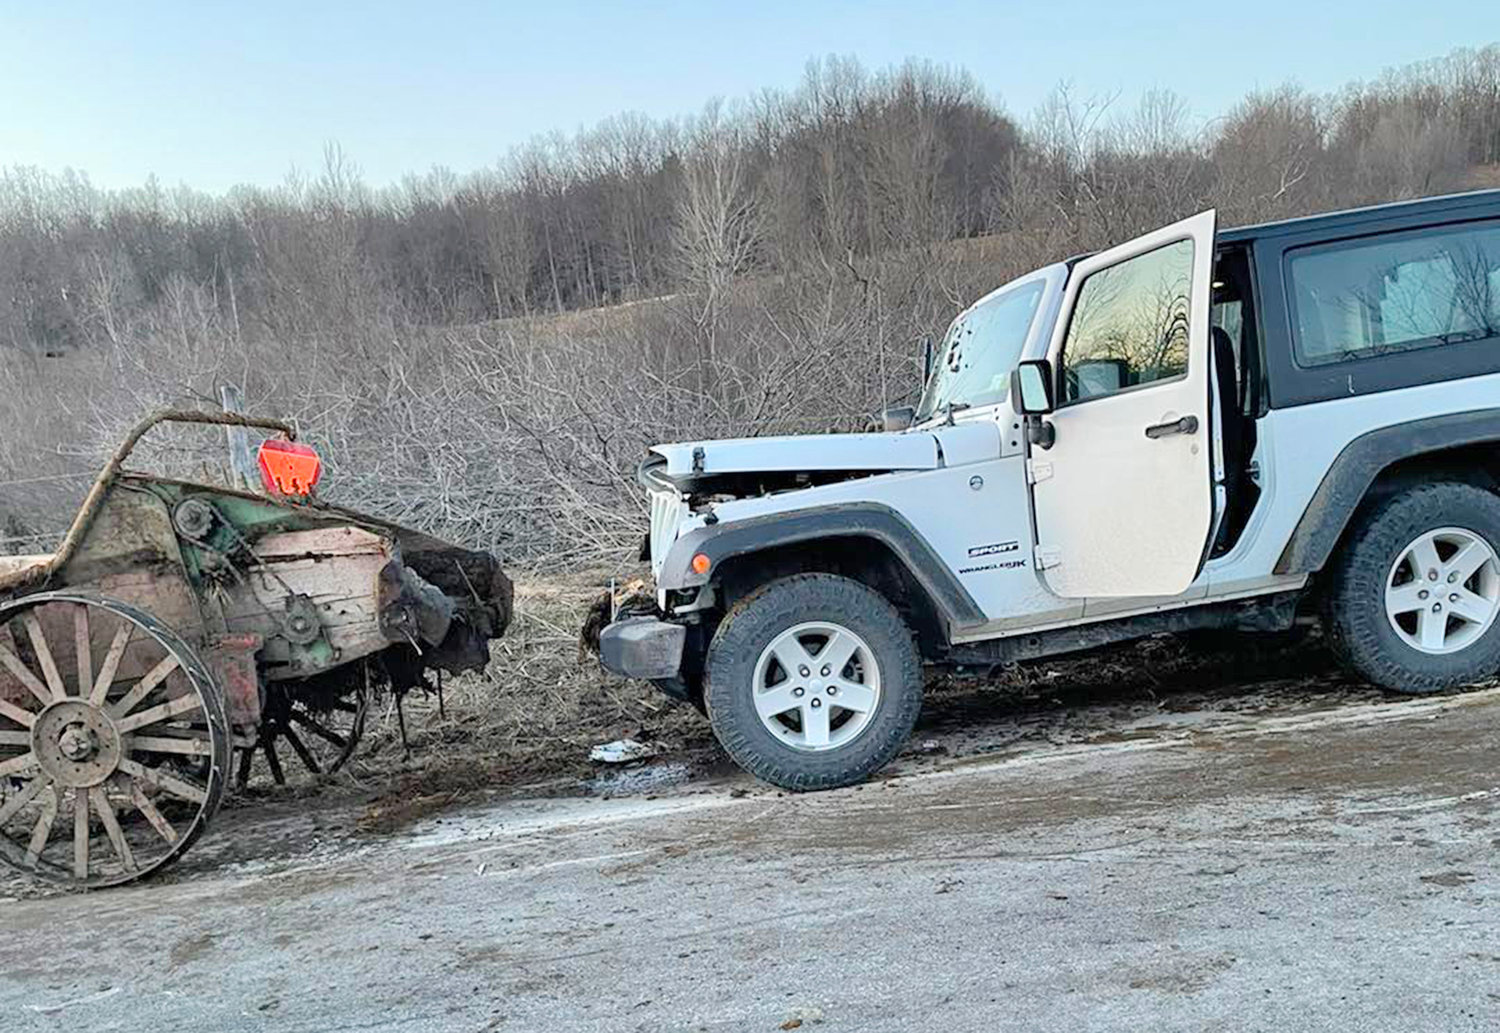 A Jeep crashed into the back of a horse-drawn manure spreader on Route 274 in Western Saturday afternoon, according to the Western Fire Department.